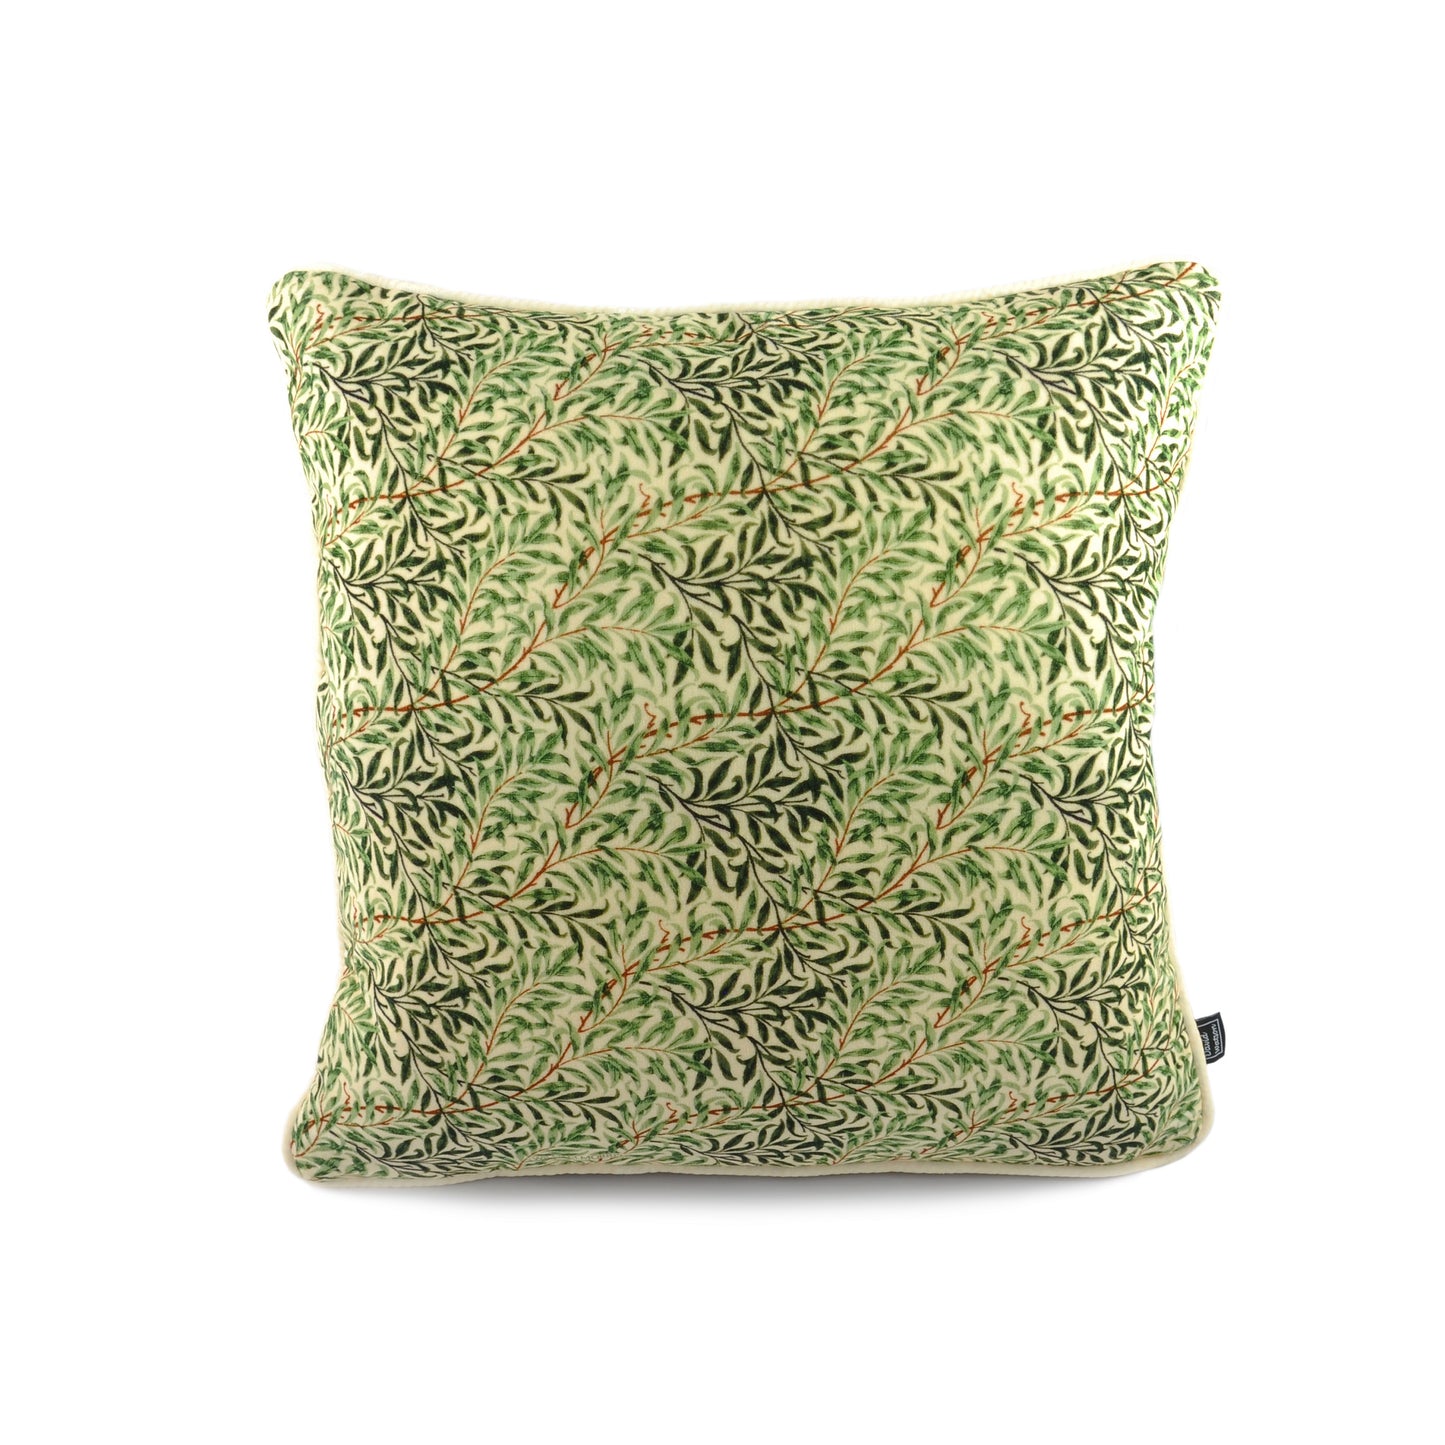 Luxury filled duck feather cushion with cotton velvet cover in William Morris Willow Bough design and piped edging.